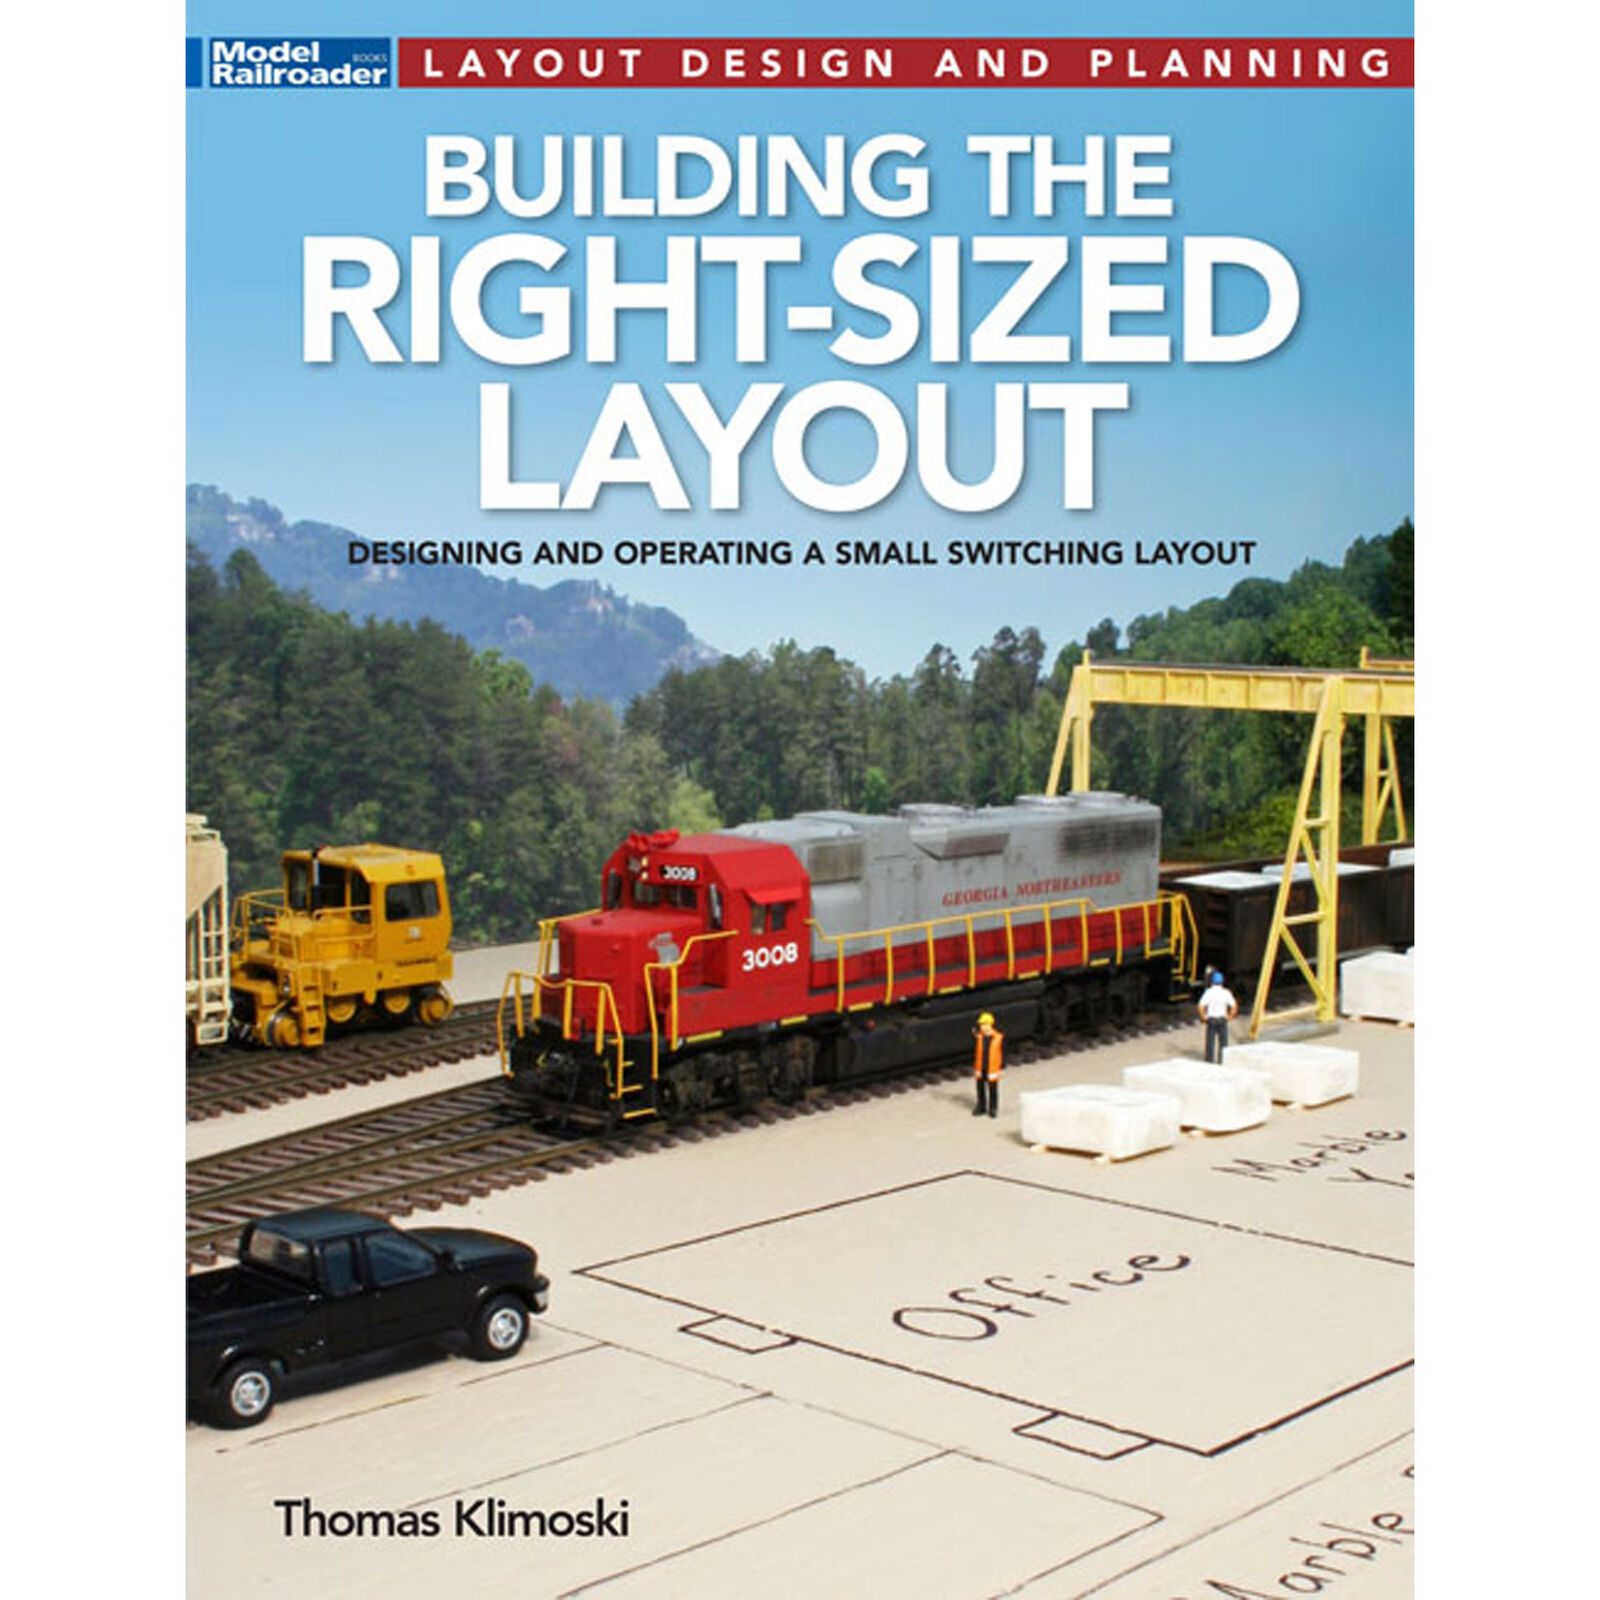 Building the Right-Sized Layout